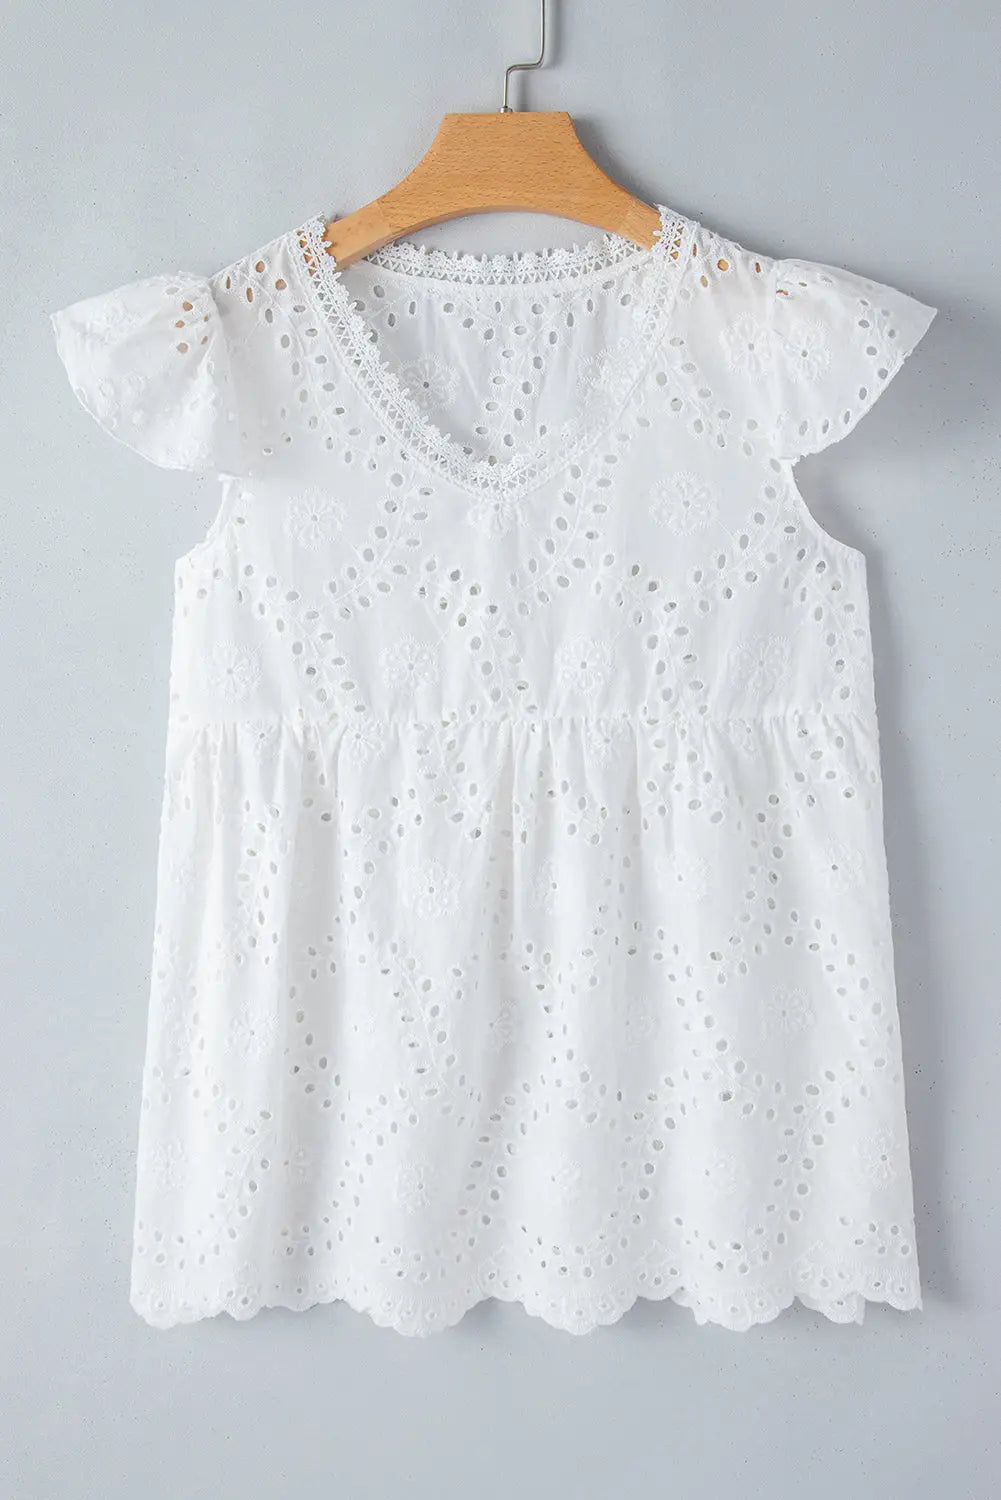 White v neck ruffled embroidered sleeveless top - tops/blouses & shirts